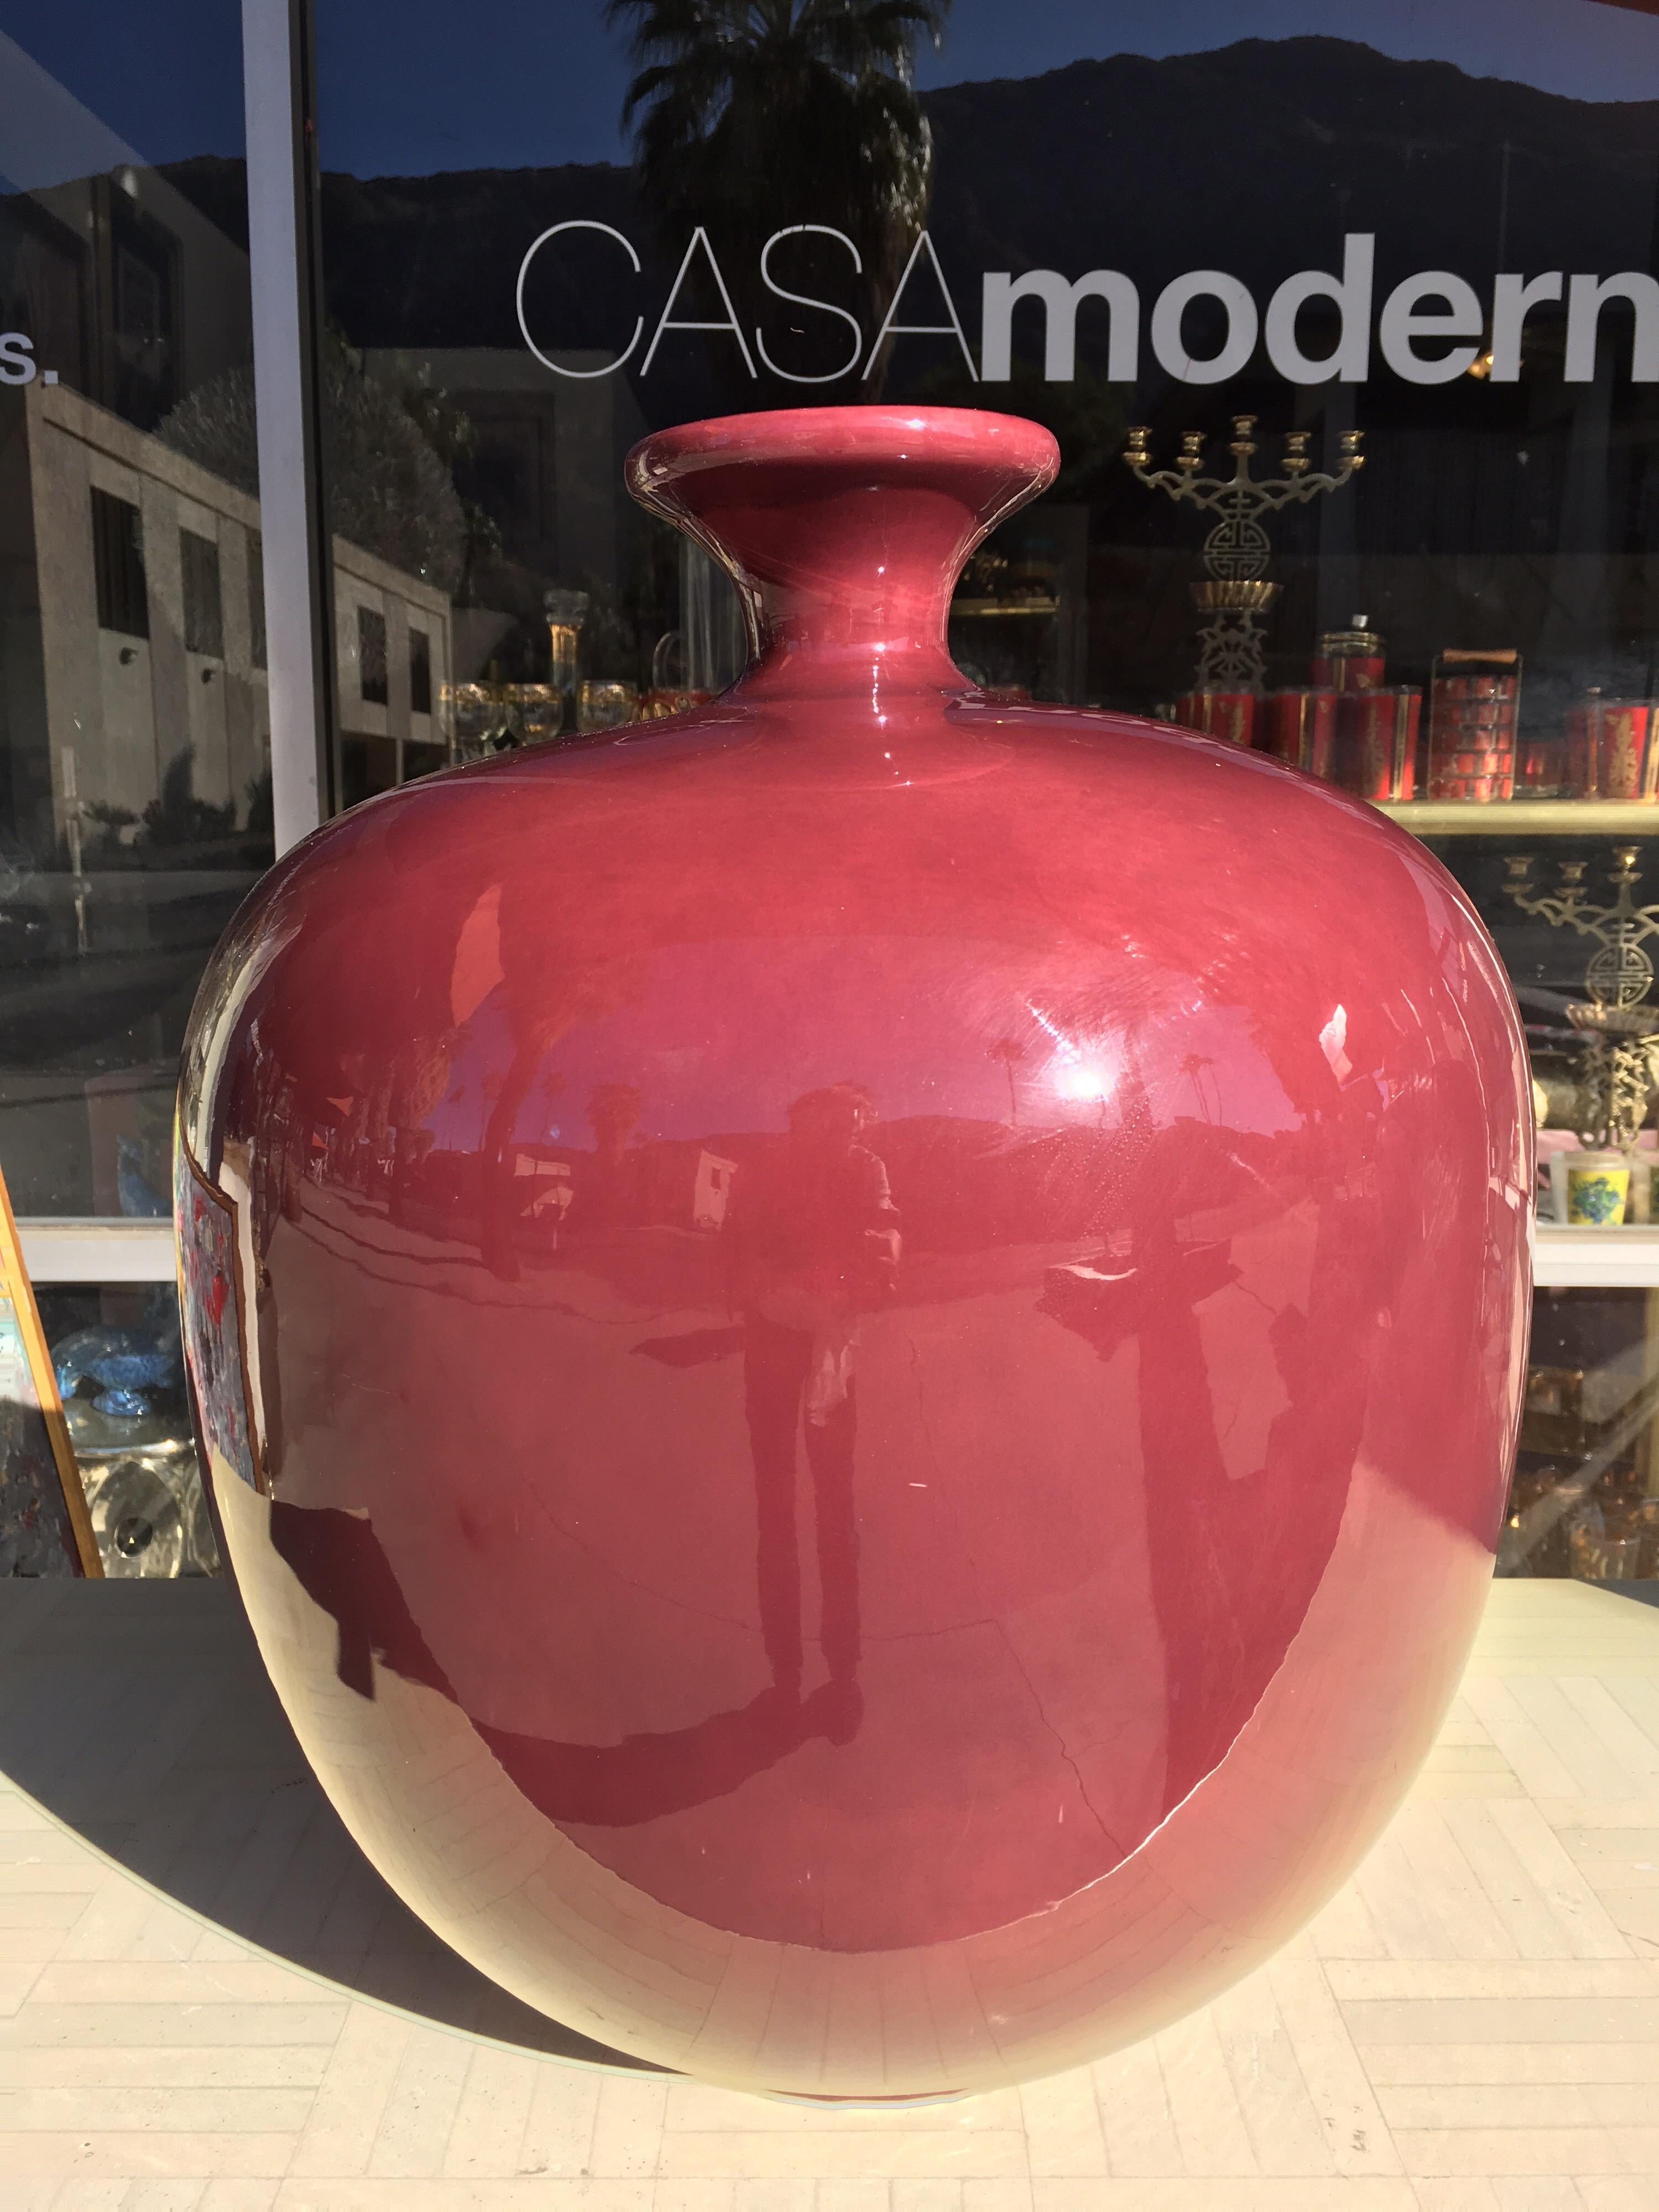 This very rare, large, berry colored ceramic vase was made in the 1980s by Jaru. Another mix matched vase in mauve/pink color is available on separate listing.